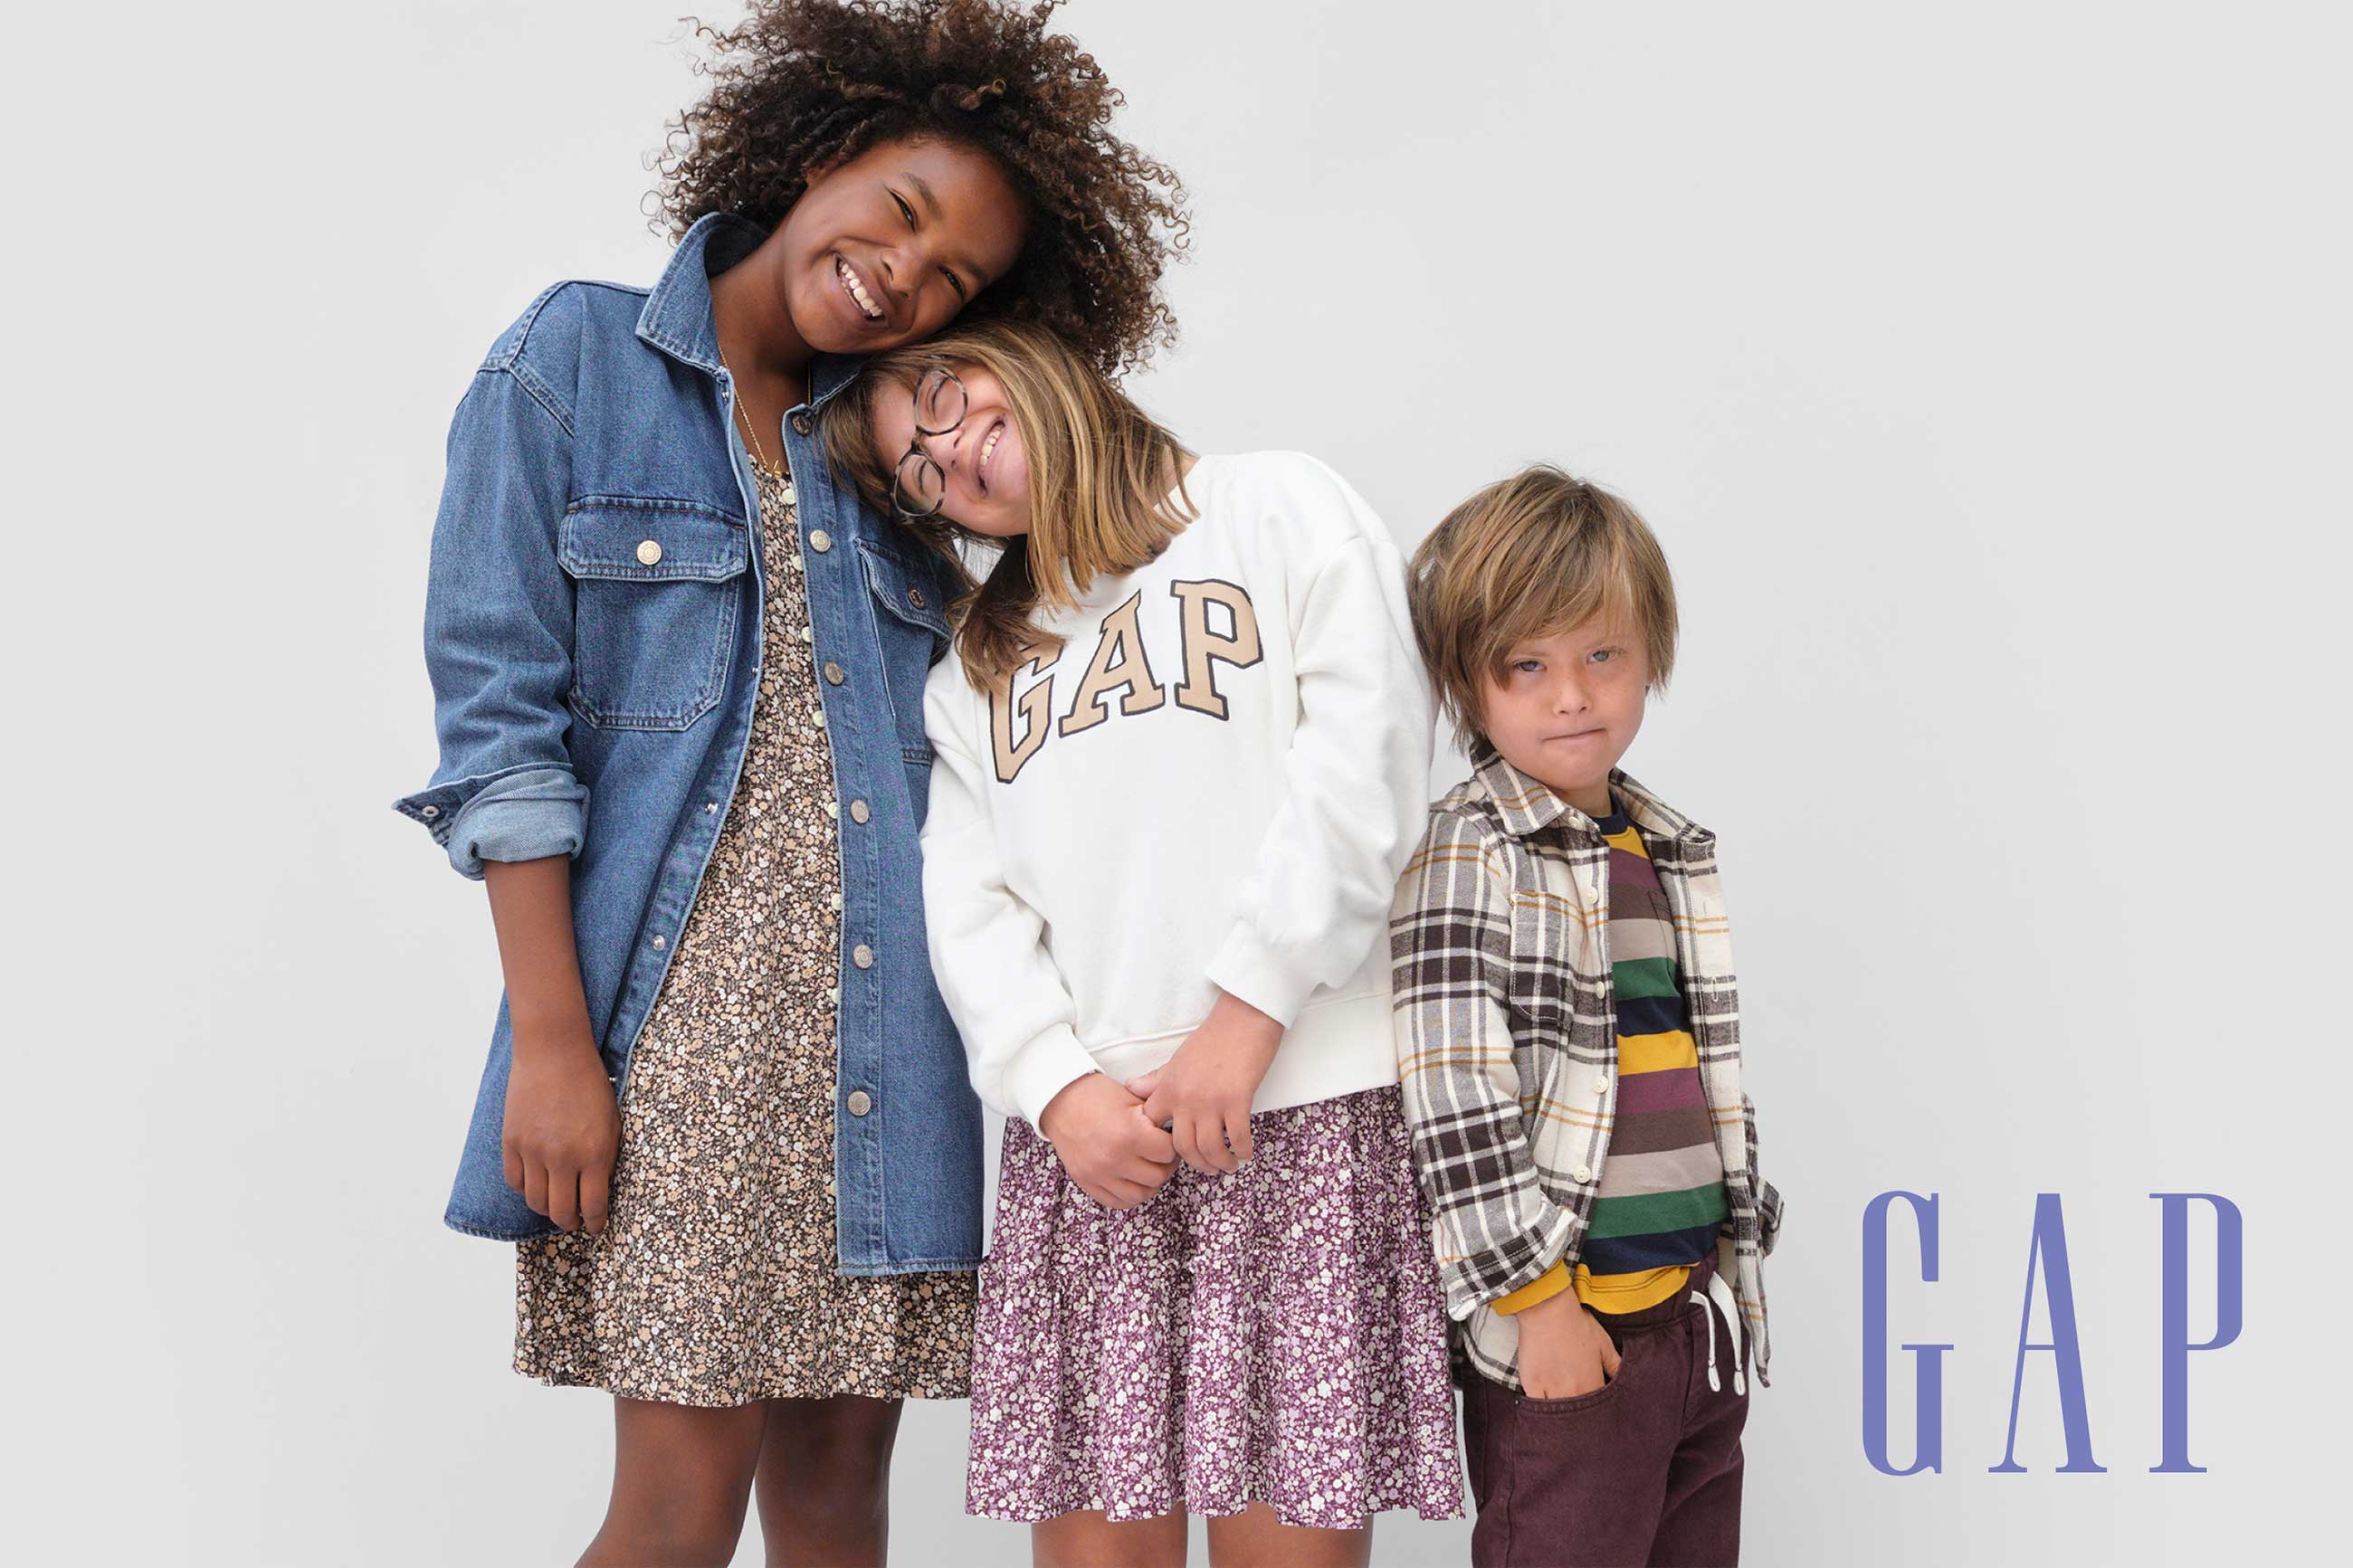 Heather Avis’s three children- Macyn, Truly, and August appear in Gap’s “EVERYONE BELONGS” campaign